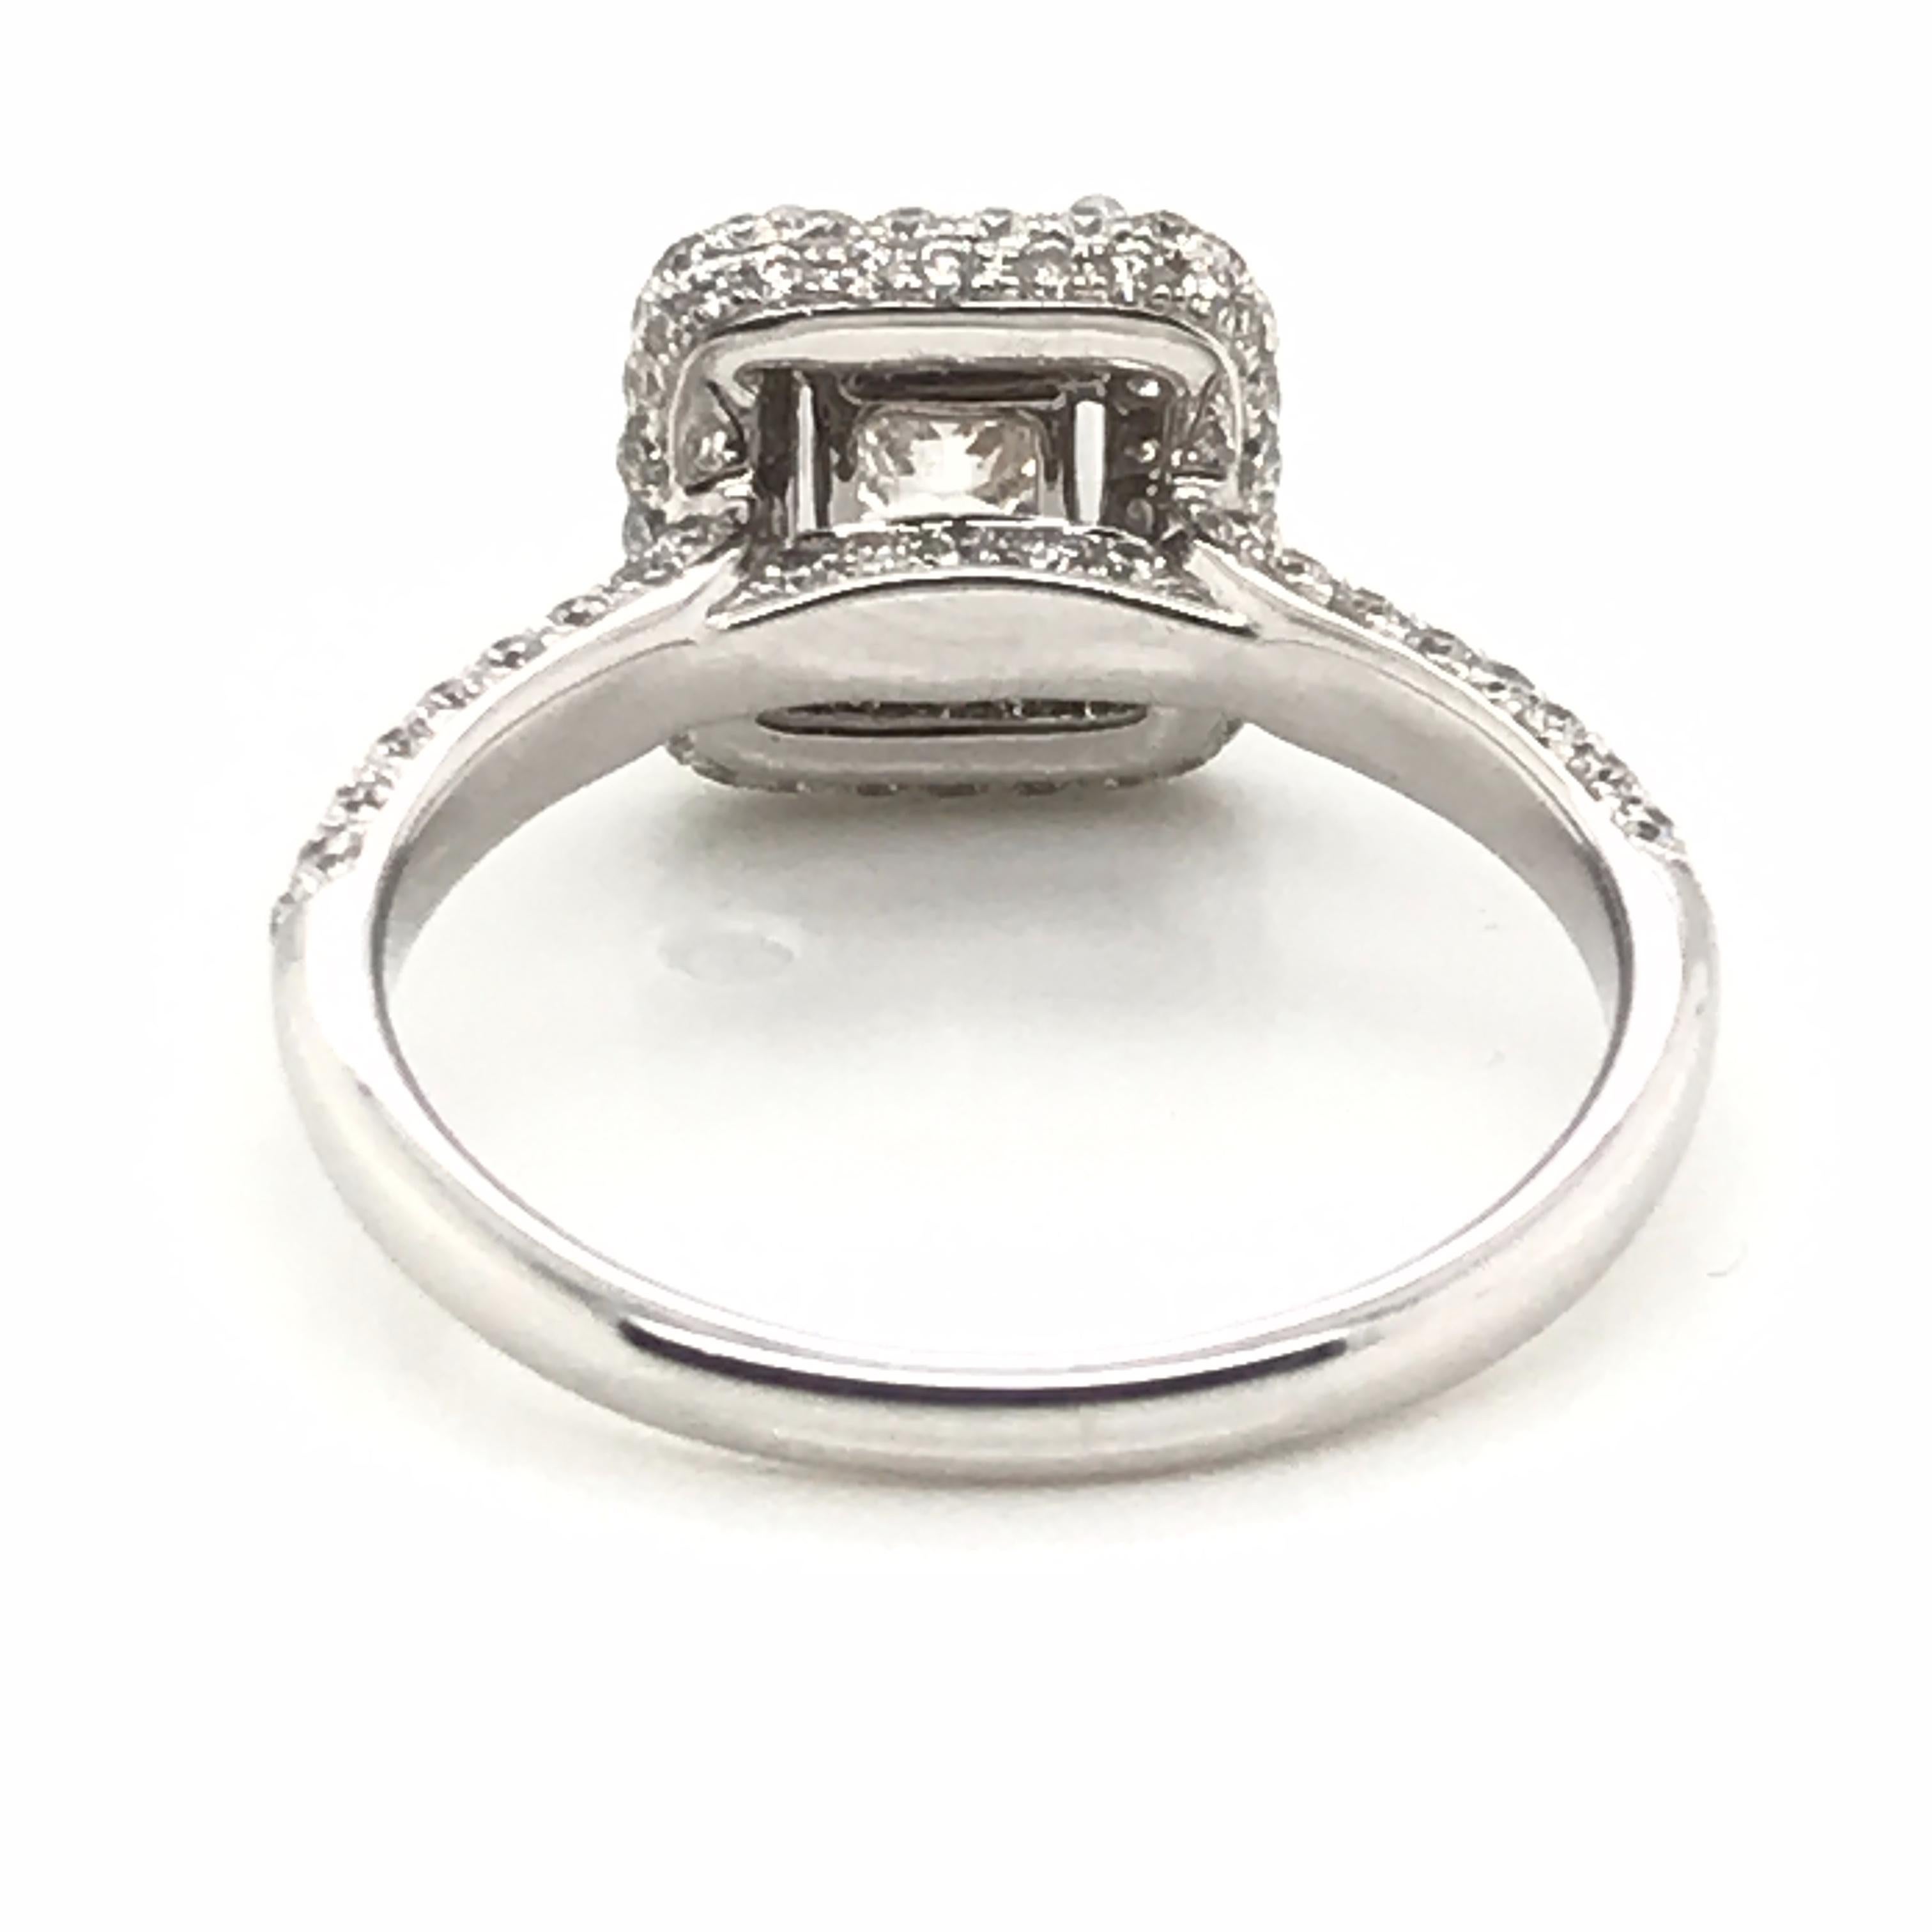  1.96 Carat Princess Cut Center with Rounds Diamond Ring For Sale 2